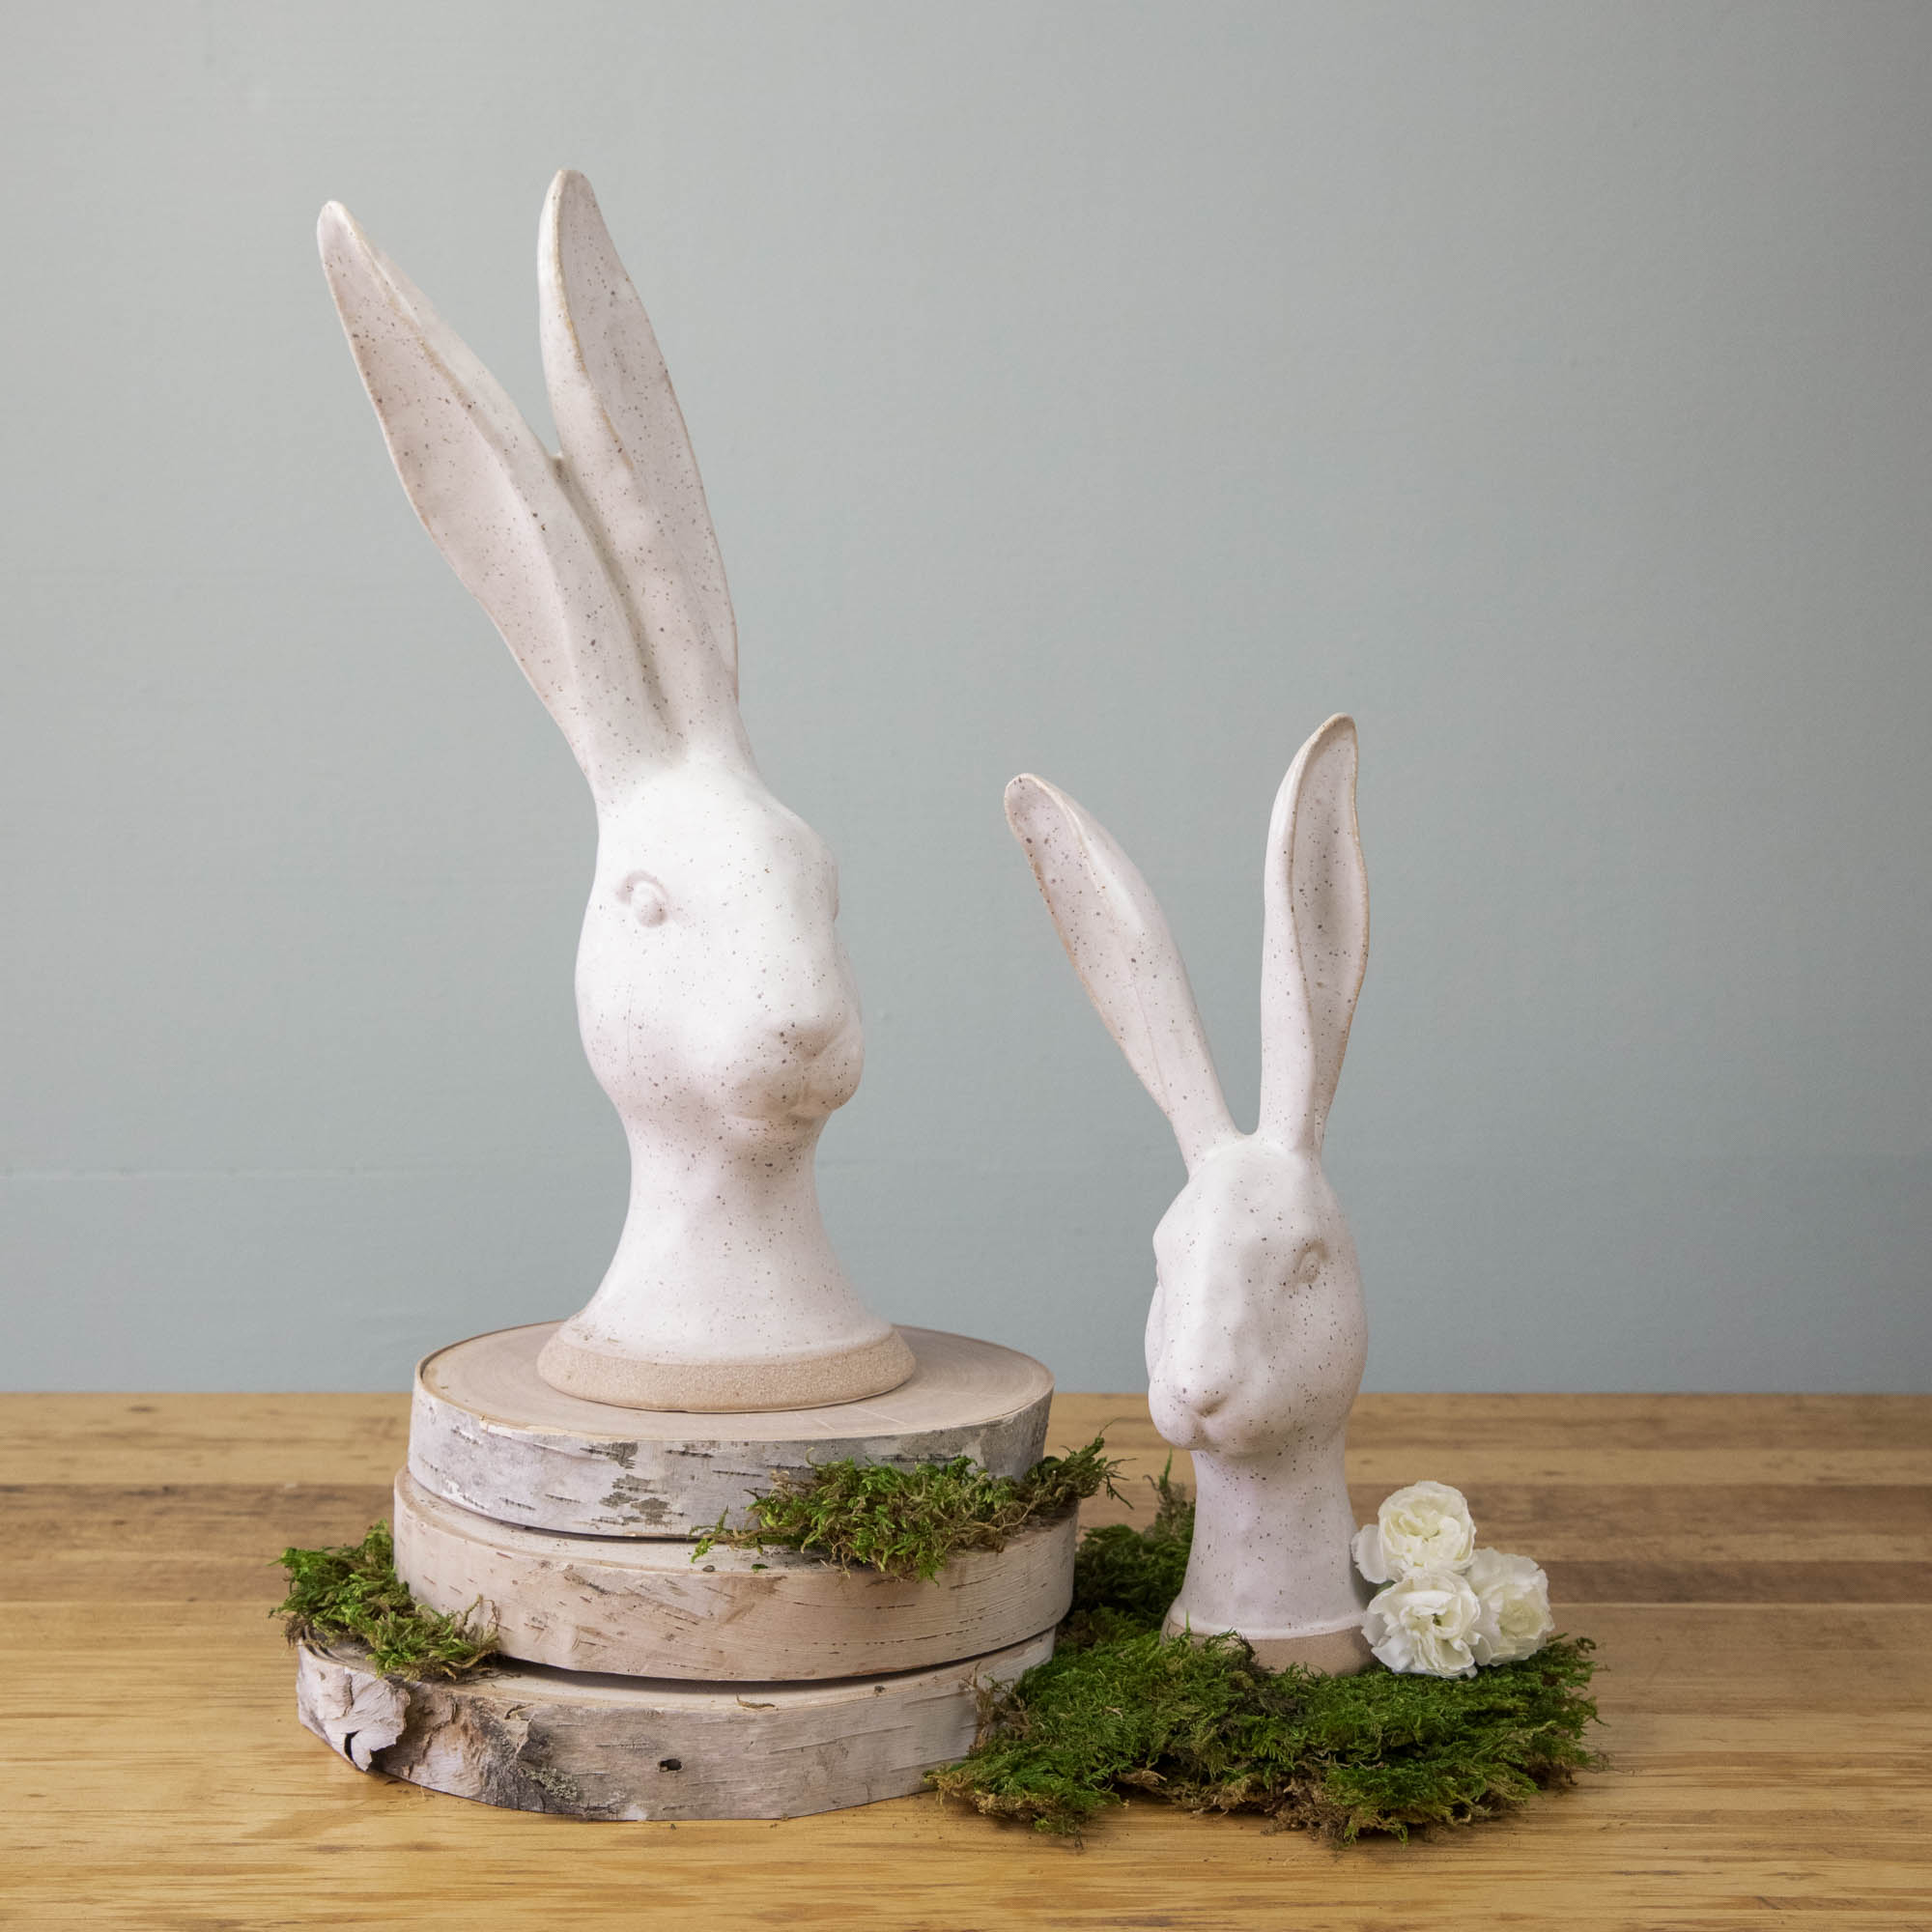 Description: Enchanting HomArt Matte White Ceramic Hares, two ceramic rabbit garden decorations, perched on top of a pile of moss.